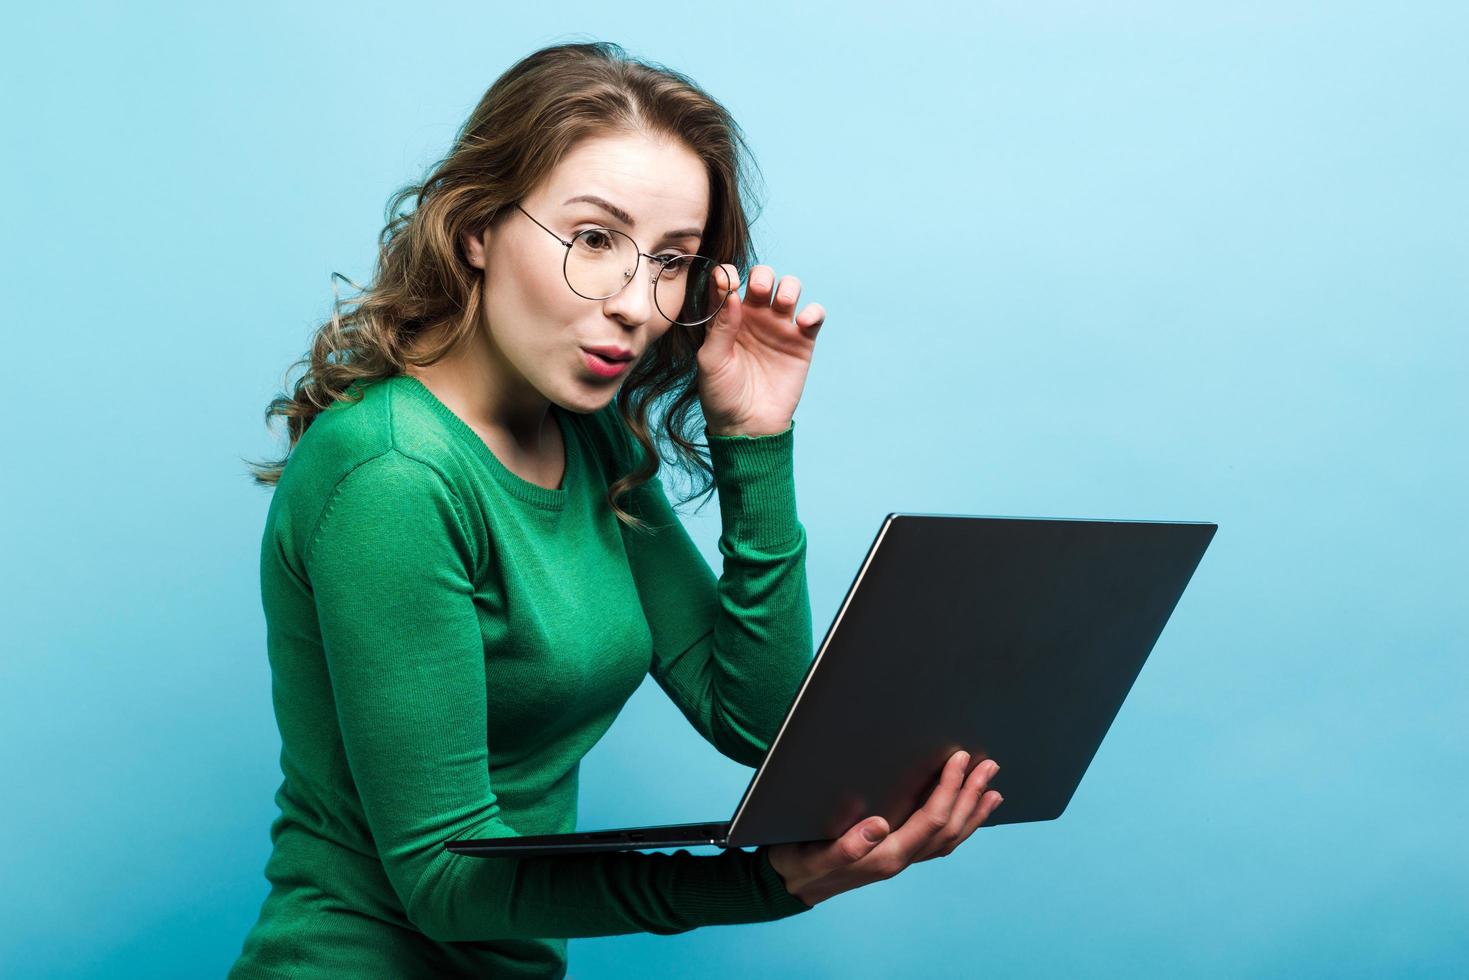 Girl surprised looking at laptop, isolated on blue background. photo